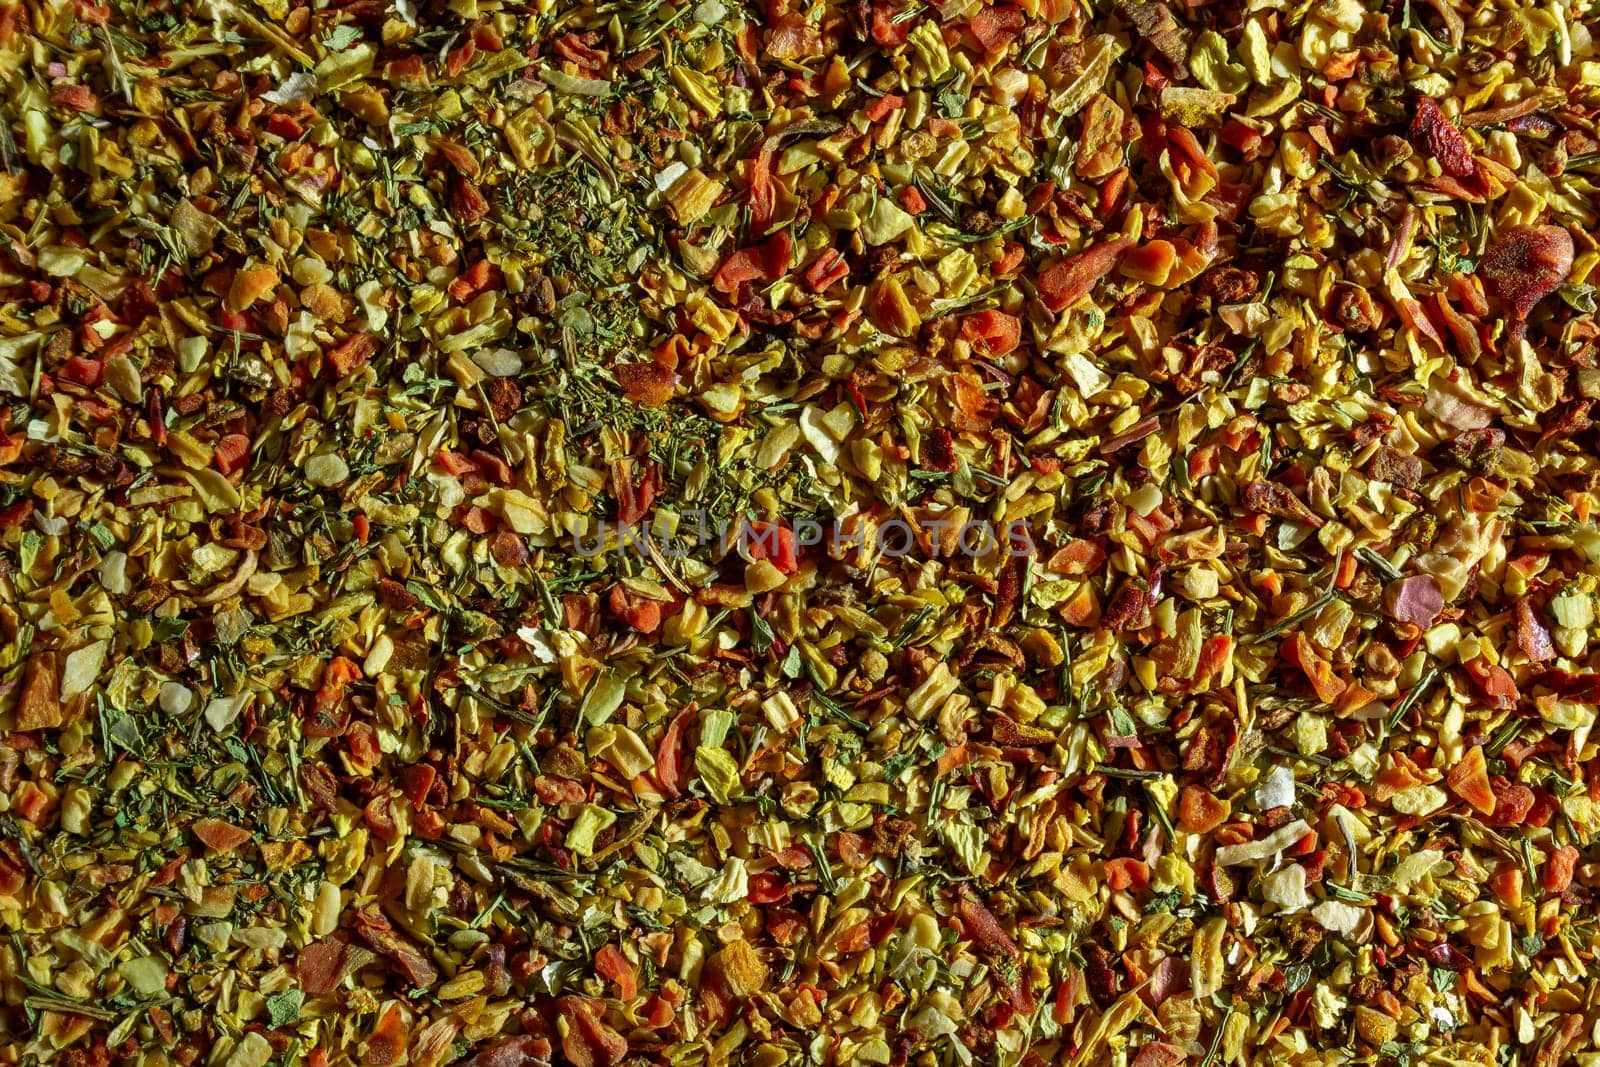 Vibrant and Colored Vegetable Seasoning Mix by InfinitumProdux